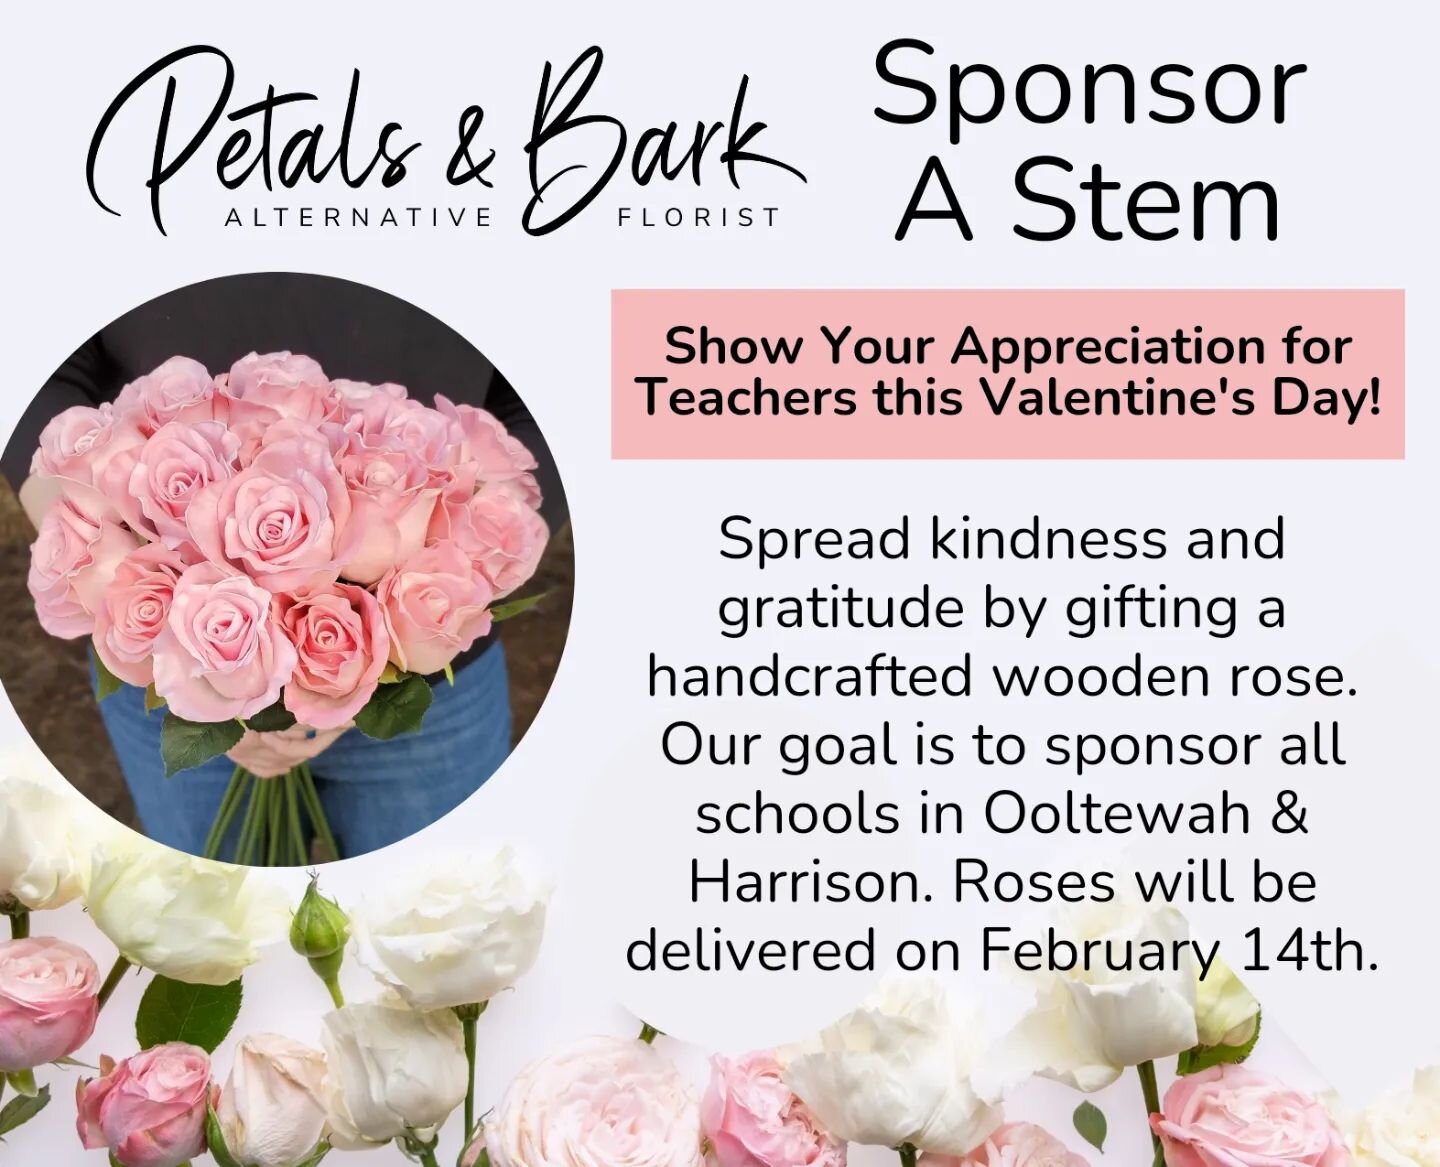 Support our teachers with a random act of kindness! 

Join Petals &amp; Bark in making a difference this Valentine's Day by contributing just $5 to sponsor a handmade wooden rose. Help us spread joy and gratitude to educators at the Ooltewah &amp; Ha